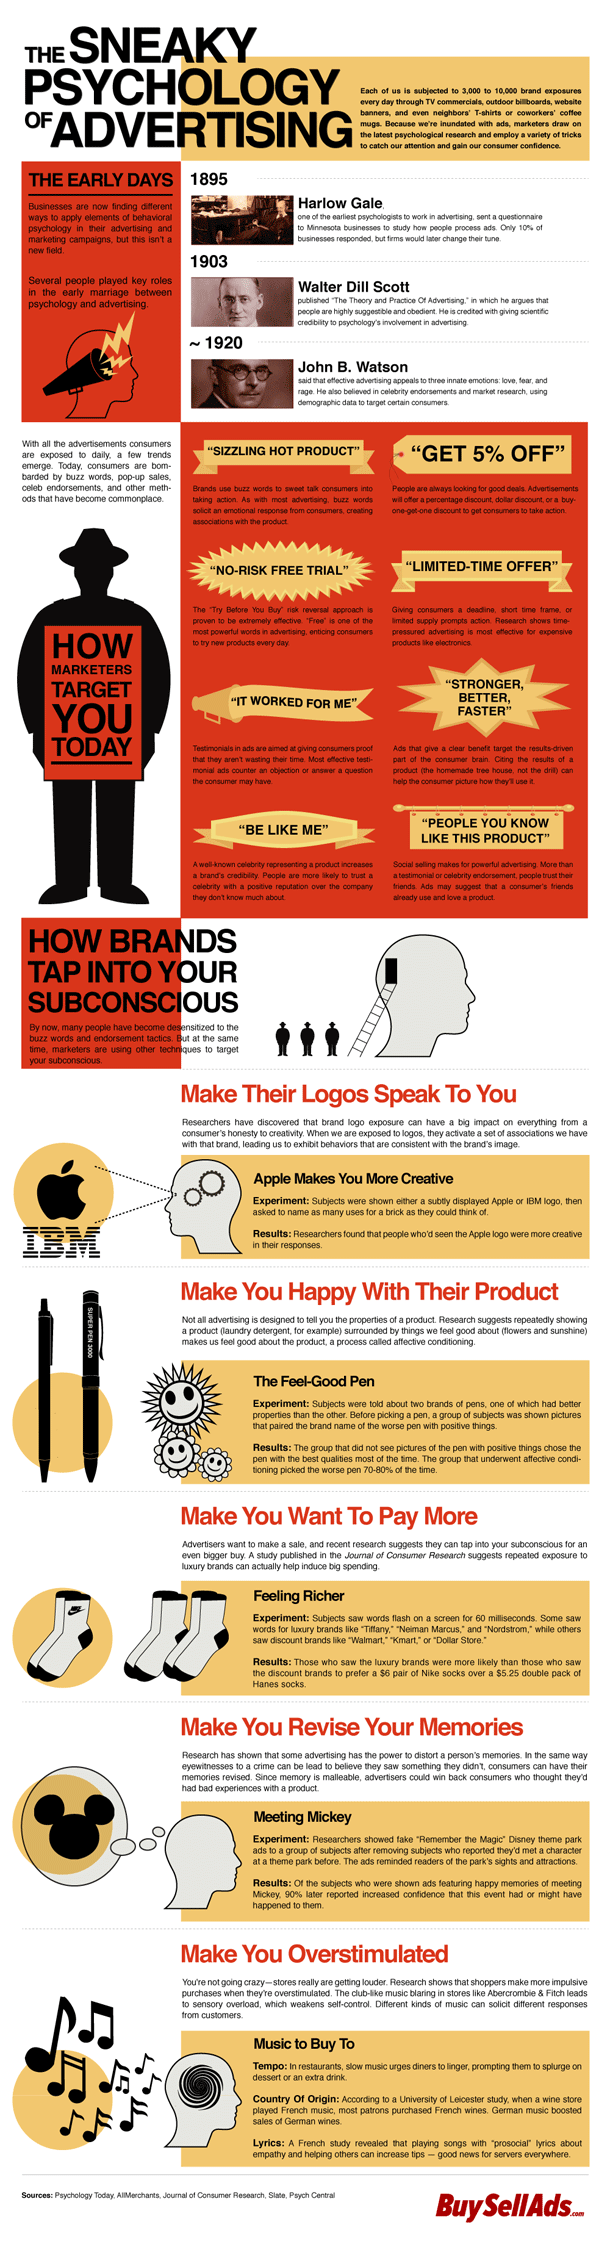 A Historical Look At The Psychology Of Advertising